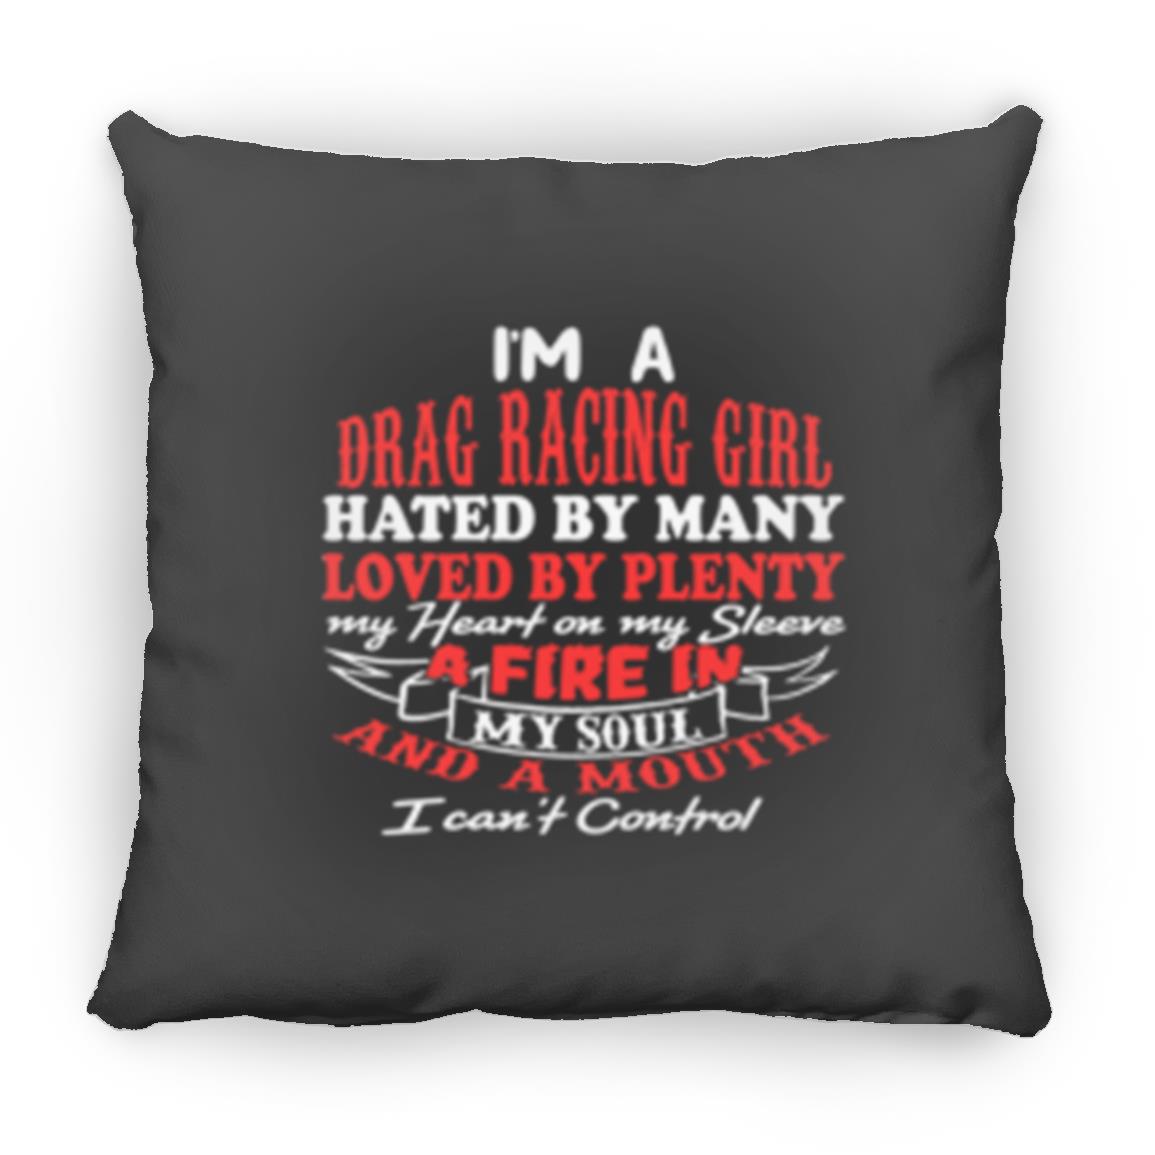 I'm A Drag Racing Girl Hated By Many Loved By Plenty Large Square Pillow